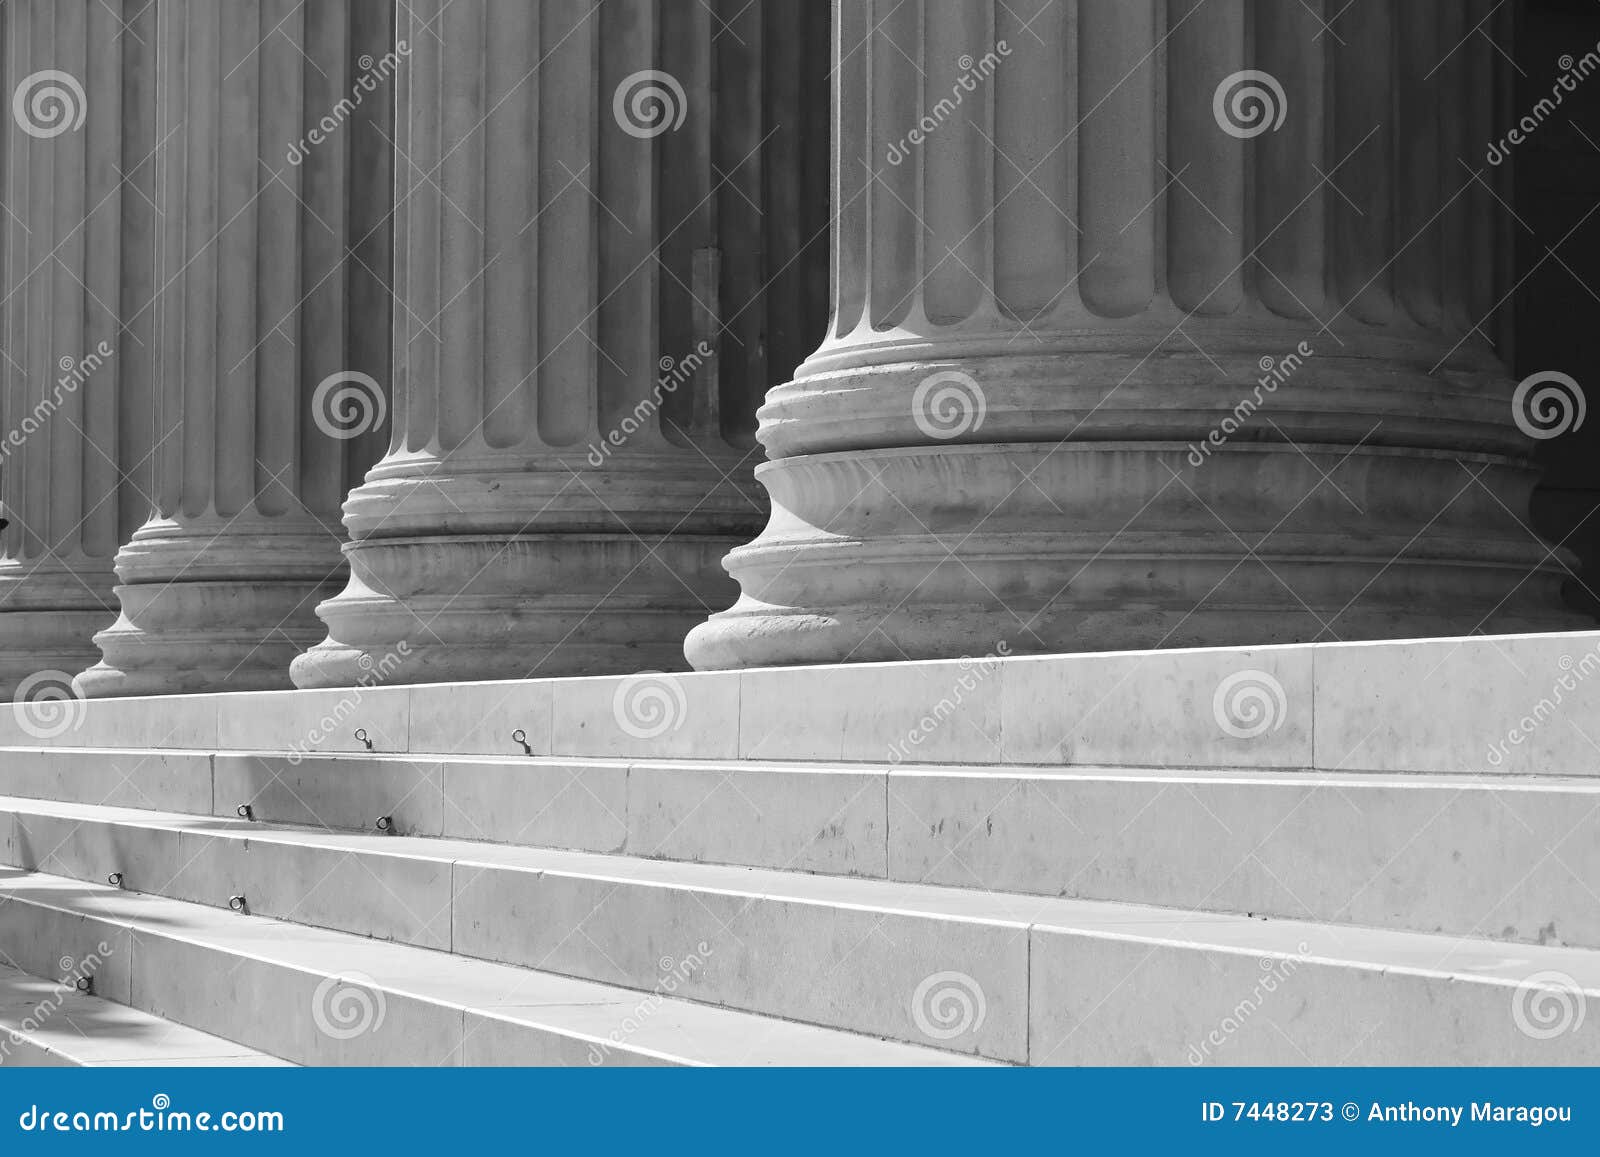 columns and stairs